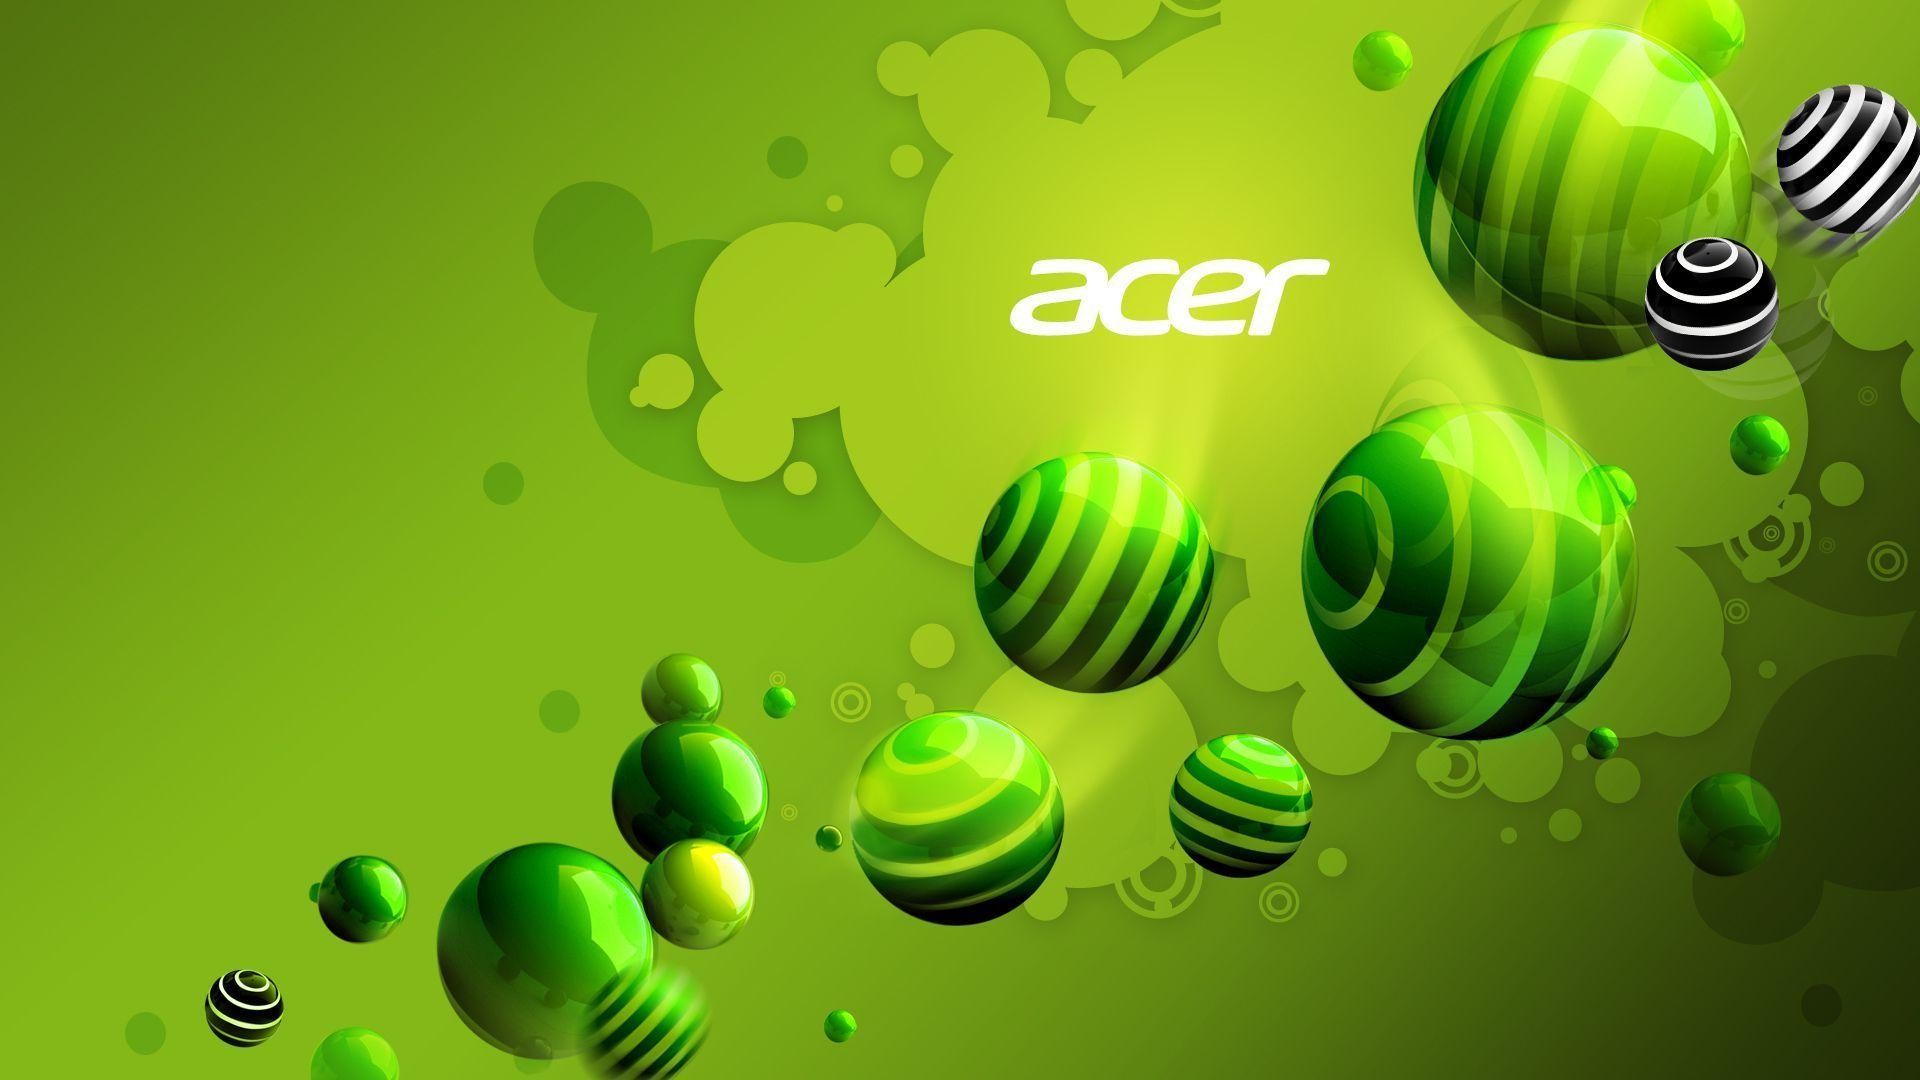 1920x1080 Themes For Acer Aspire One Free Download Pictures to pin on Pinterest